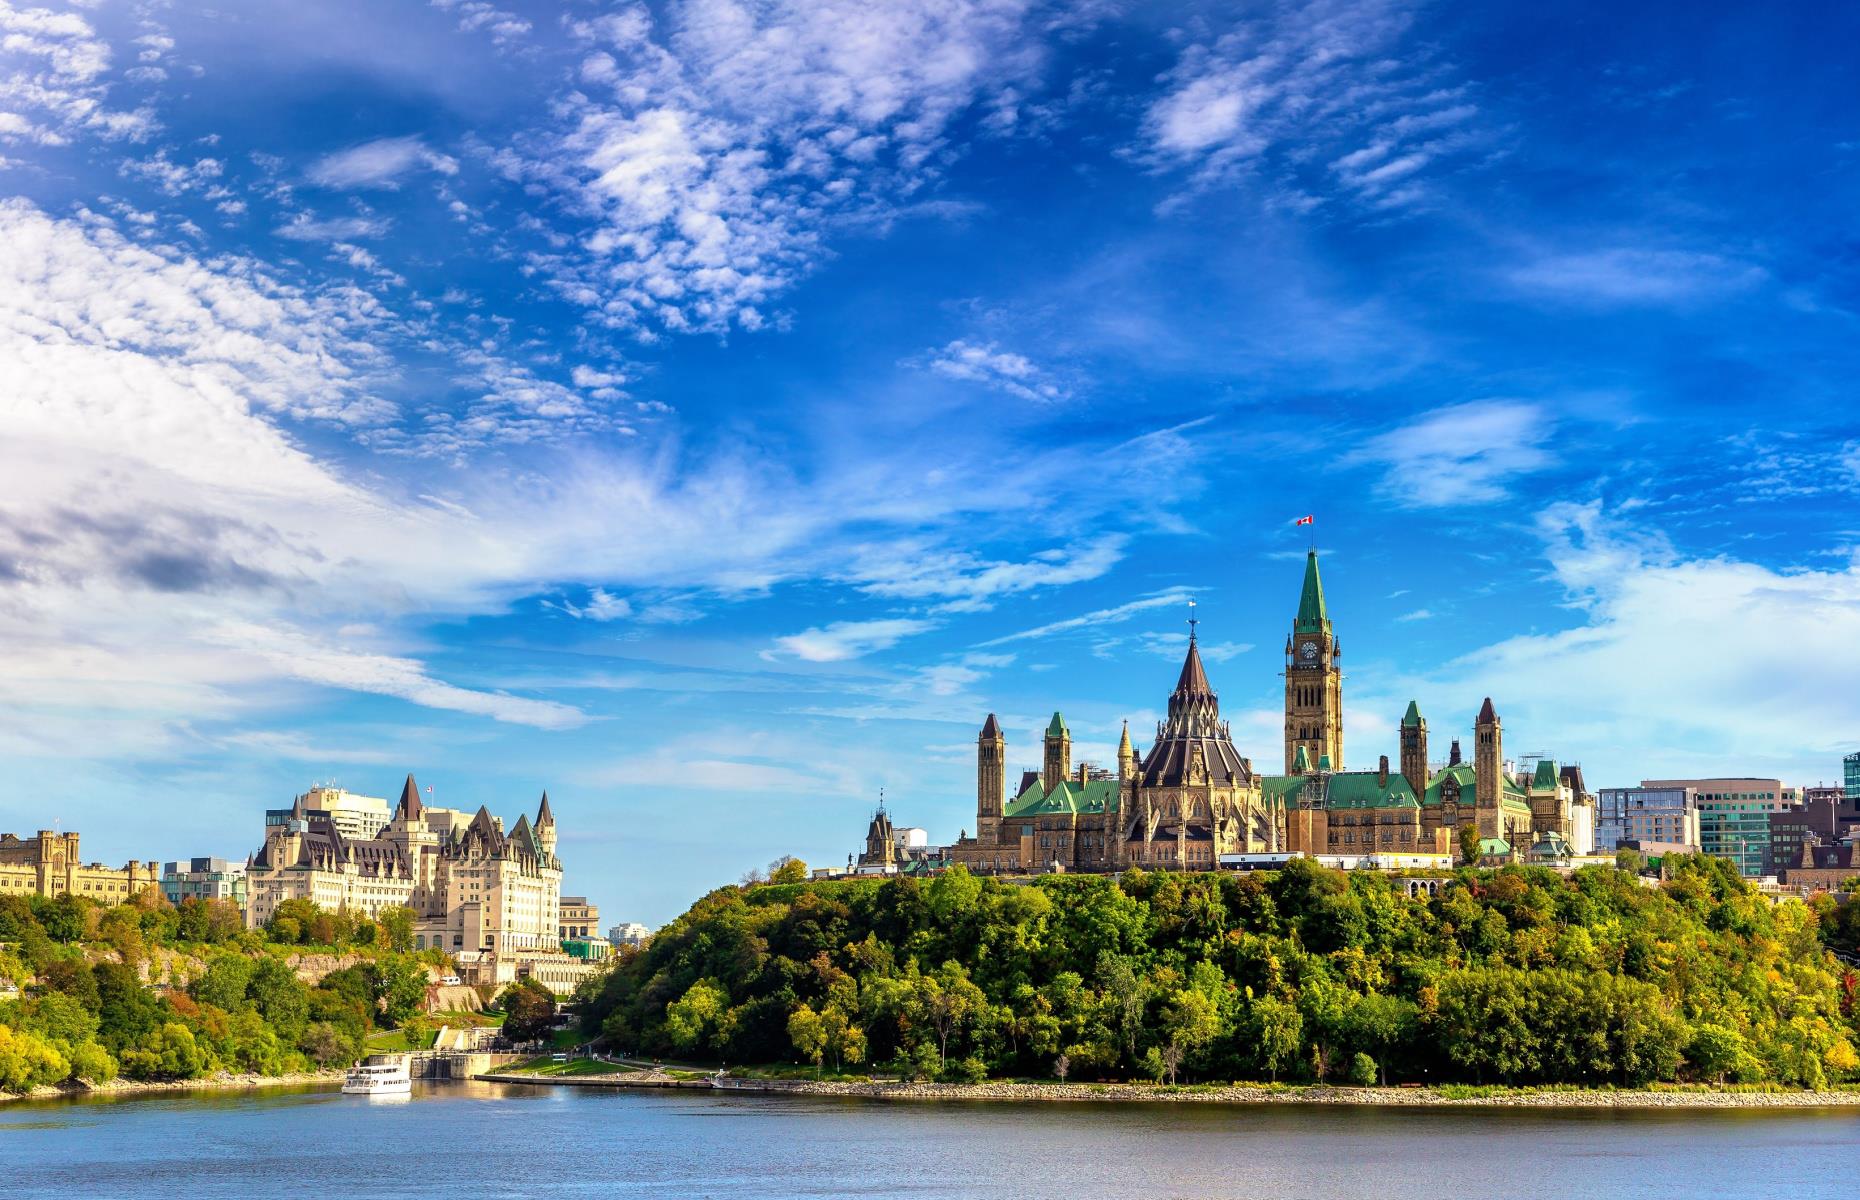 <p>As Canada’s capital, <a href="https://www.loveexploring.com/guides/111246/explore-ottawa-what-to-see-and-do-in-canadas-capital">Ottawa</a> is home to the nation's Parliament Buildings, instantly recognizable for their impressive Gothic-Revival façades. Parliament Hill is far from the only beautiful place in Ottawa, though, and the city is full of national museums, university and college campuses and other cool-looking official buildings. Munch on maple-leaf-shaped cookies at the city's famous <a href="https://www.byward-market.com/">ByWard Market</a> or wander the Rideau Canal, which freezes over in the winter and serves as an enormous skating rink.</p>